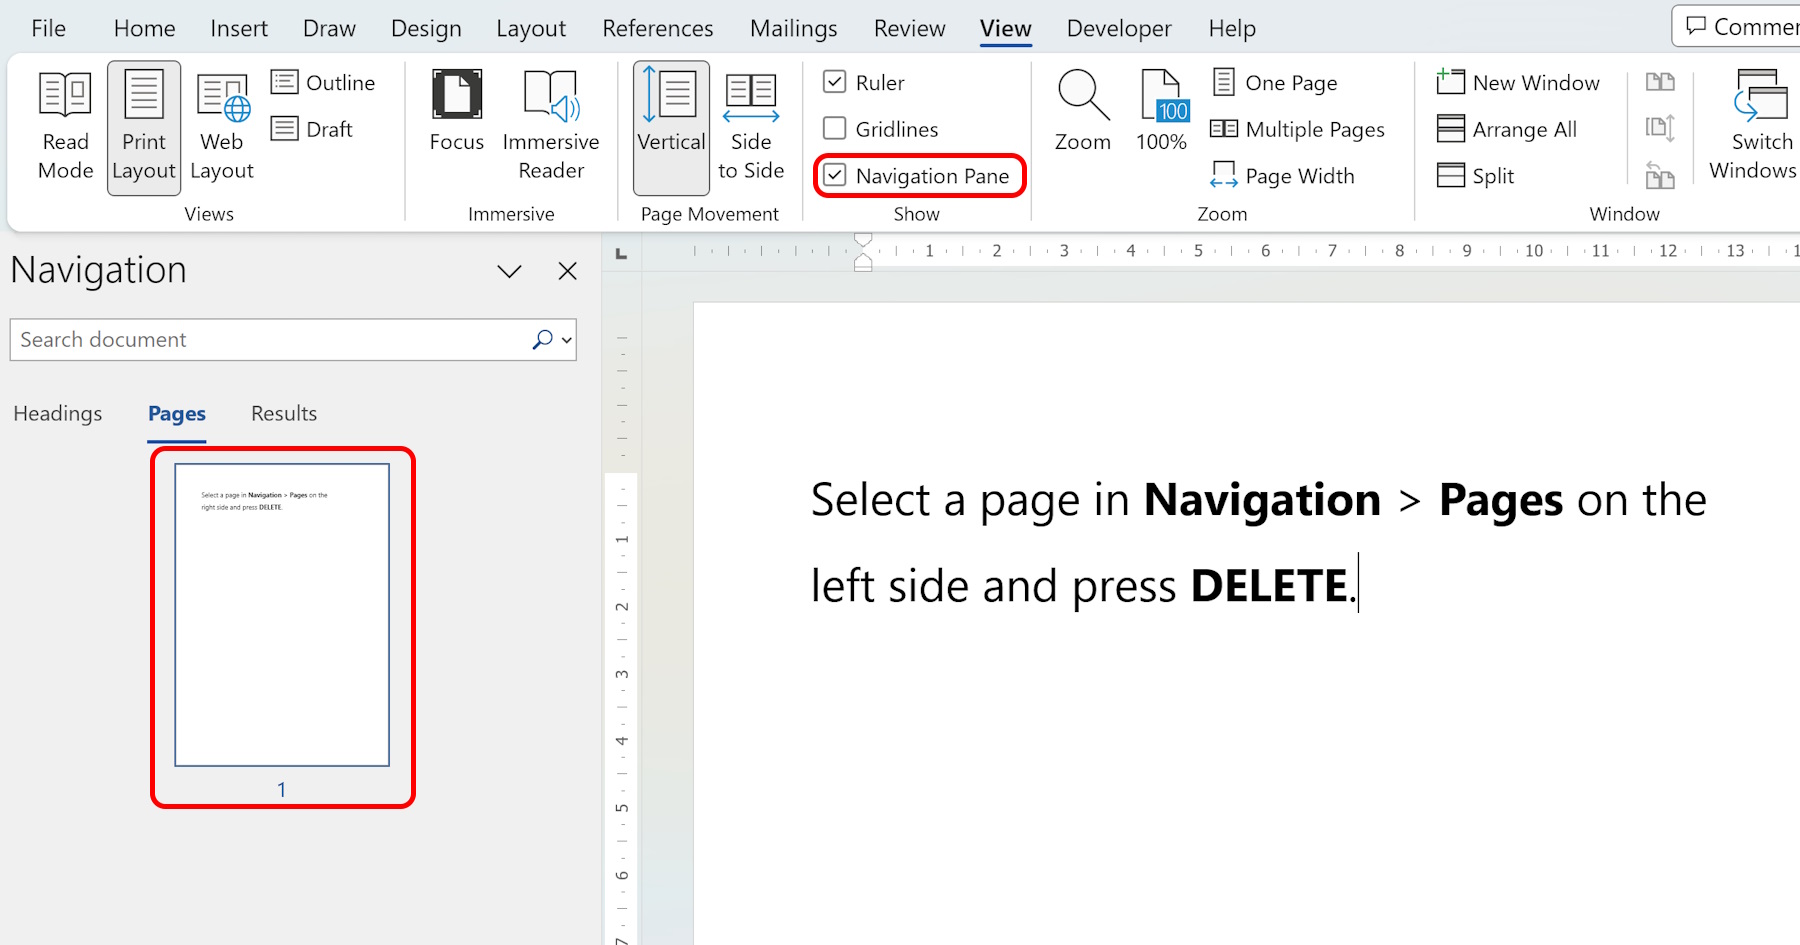 Learn how to delete a page in Word with this step-by-step guide. Whether you made a mistake or no longer need a page, these techniques will help you easily remove unwanted pages from your documents.